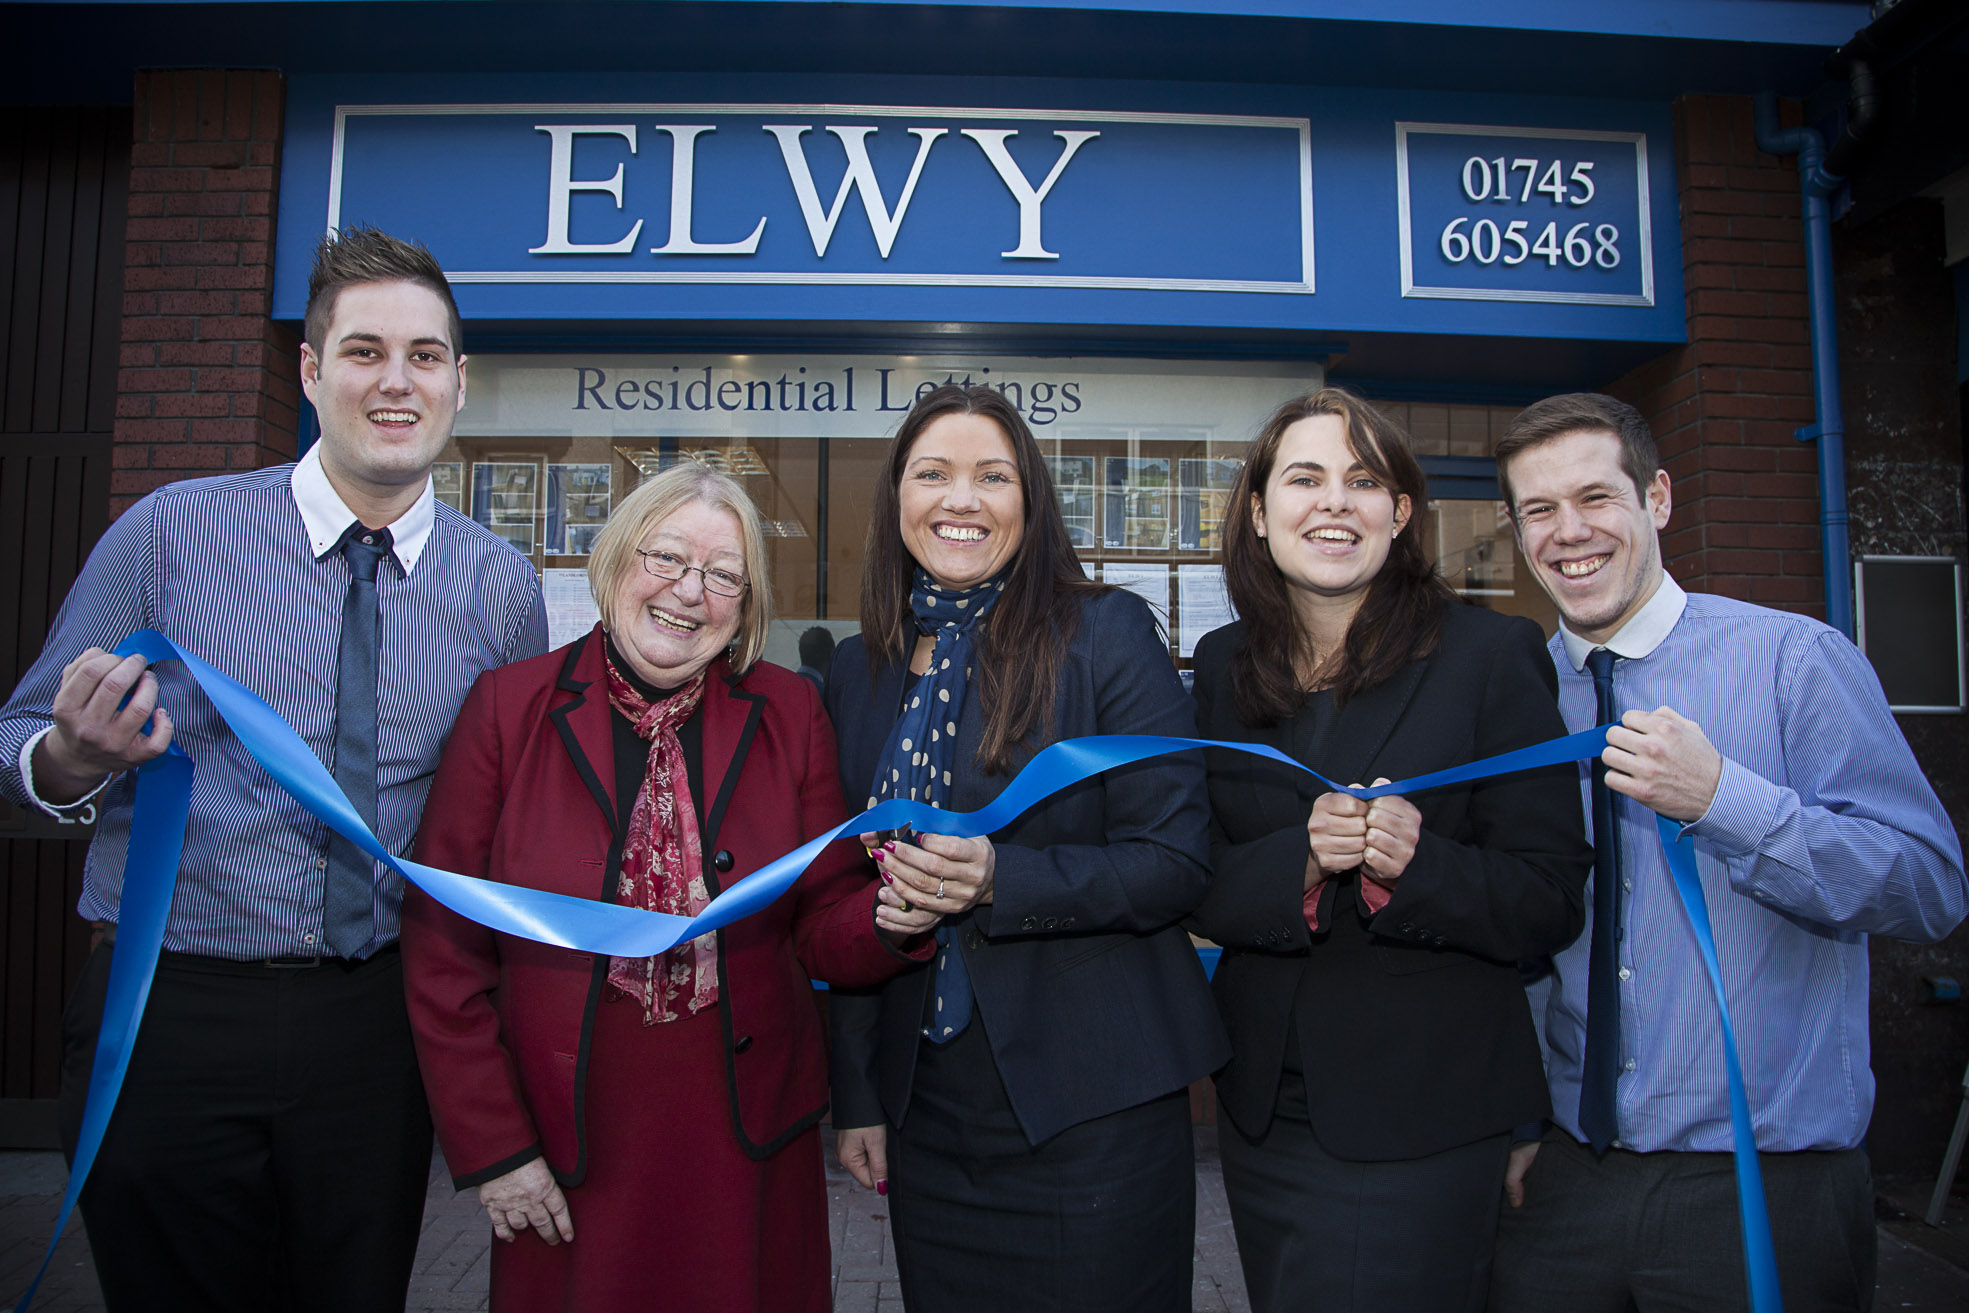 New jobs for Rhyl as lettings firm expands